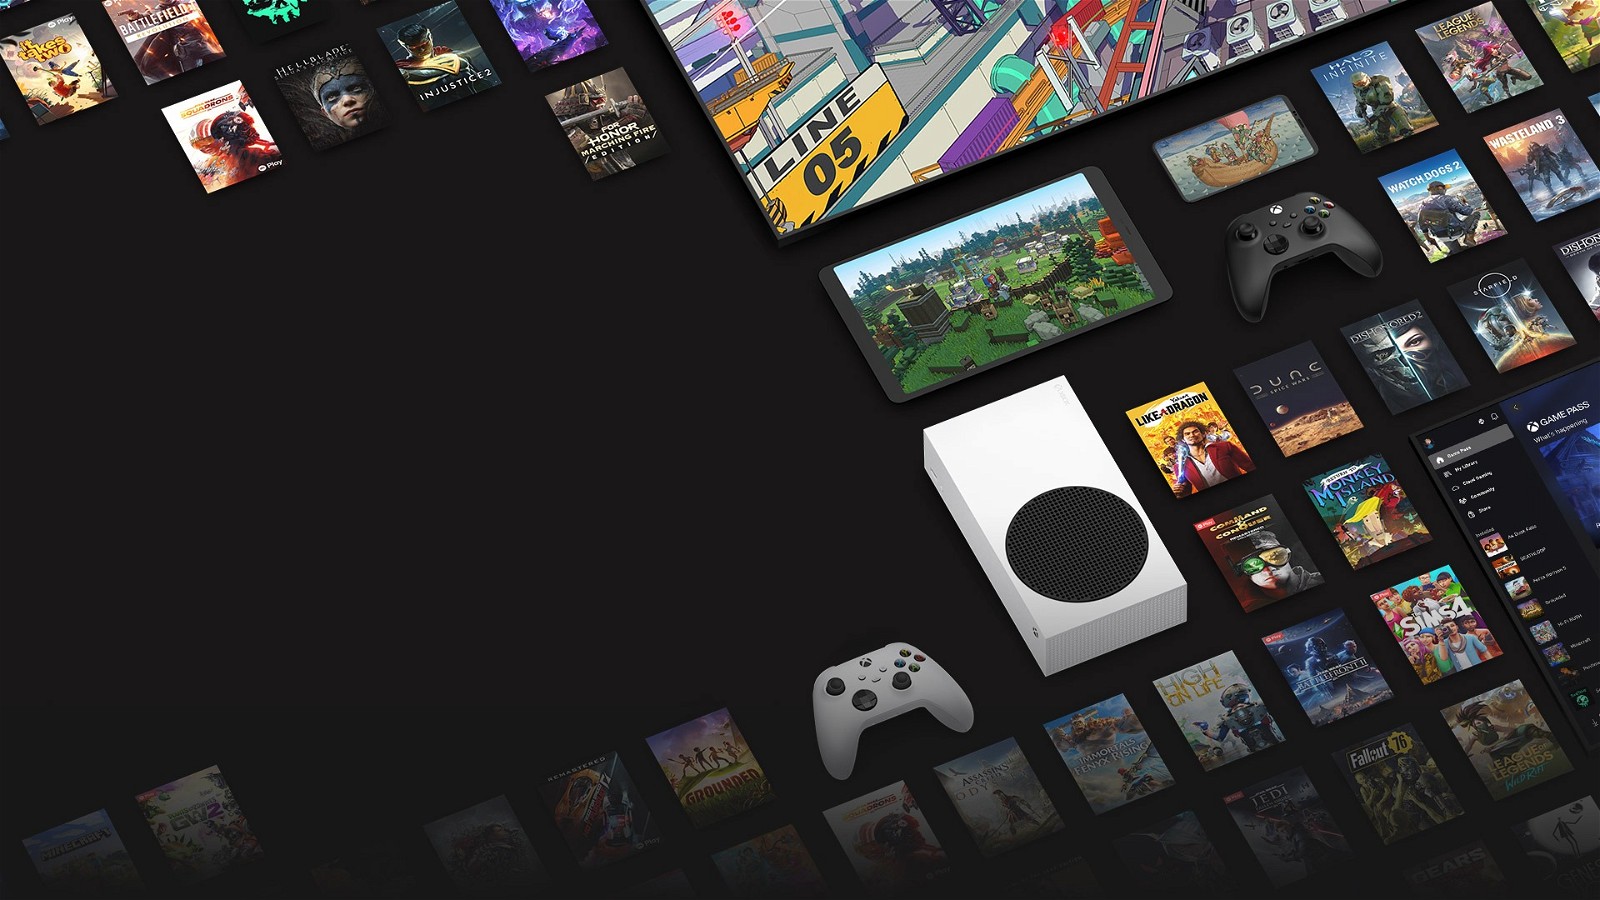 The success of Game Pass and Series S vindicated Xbox's all-digital plans.